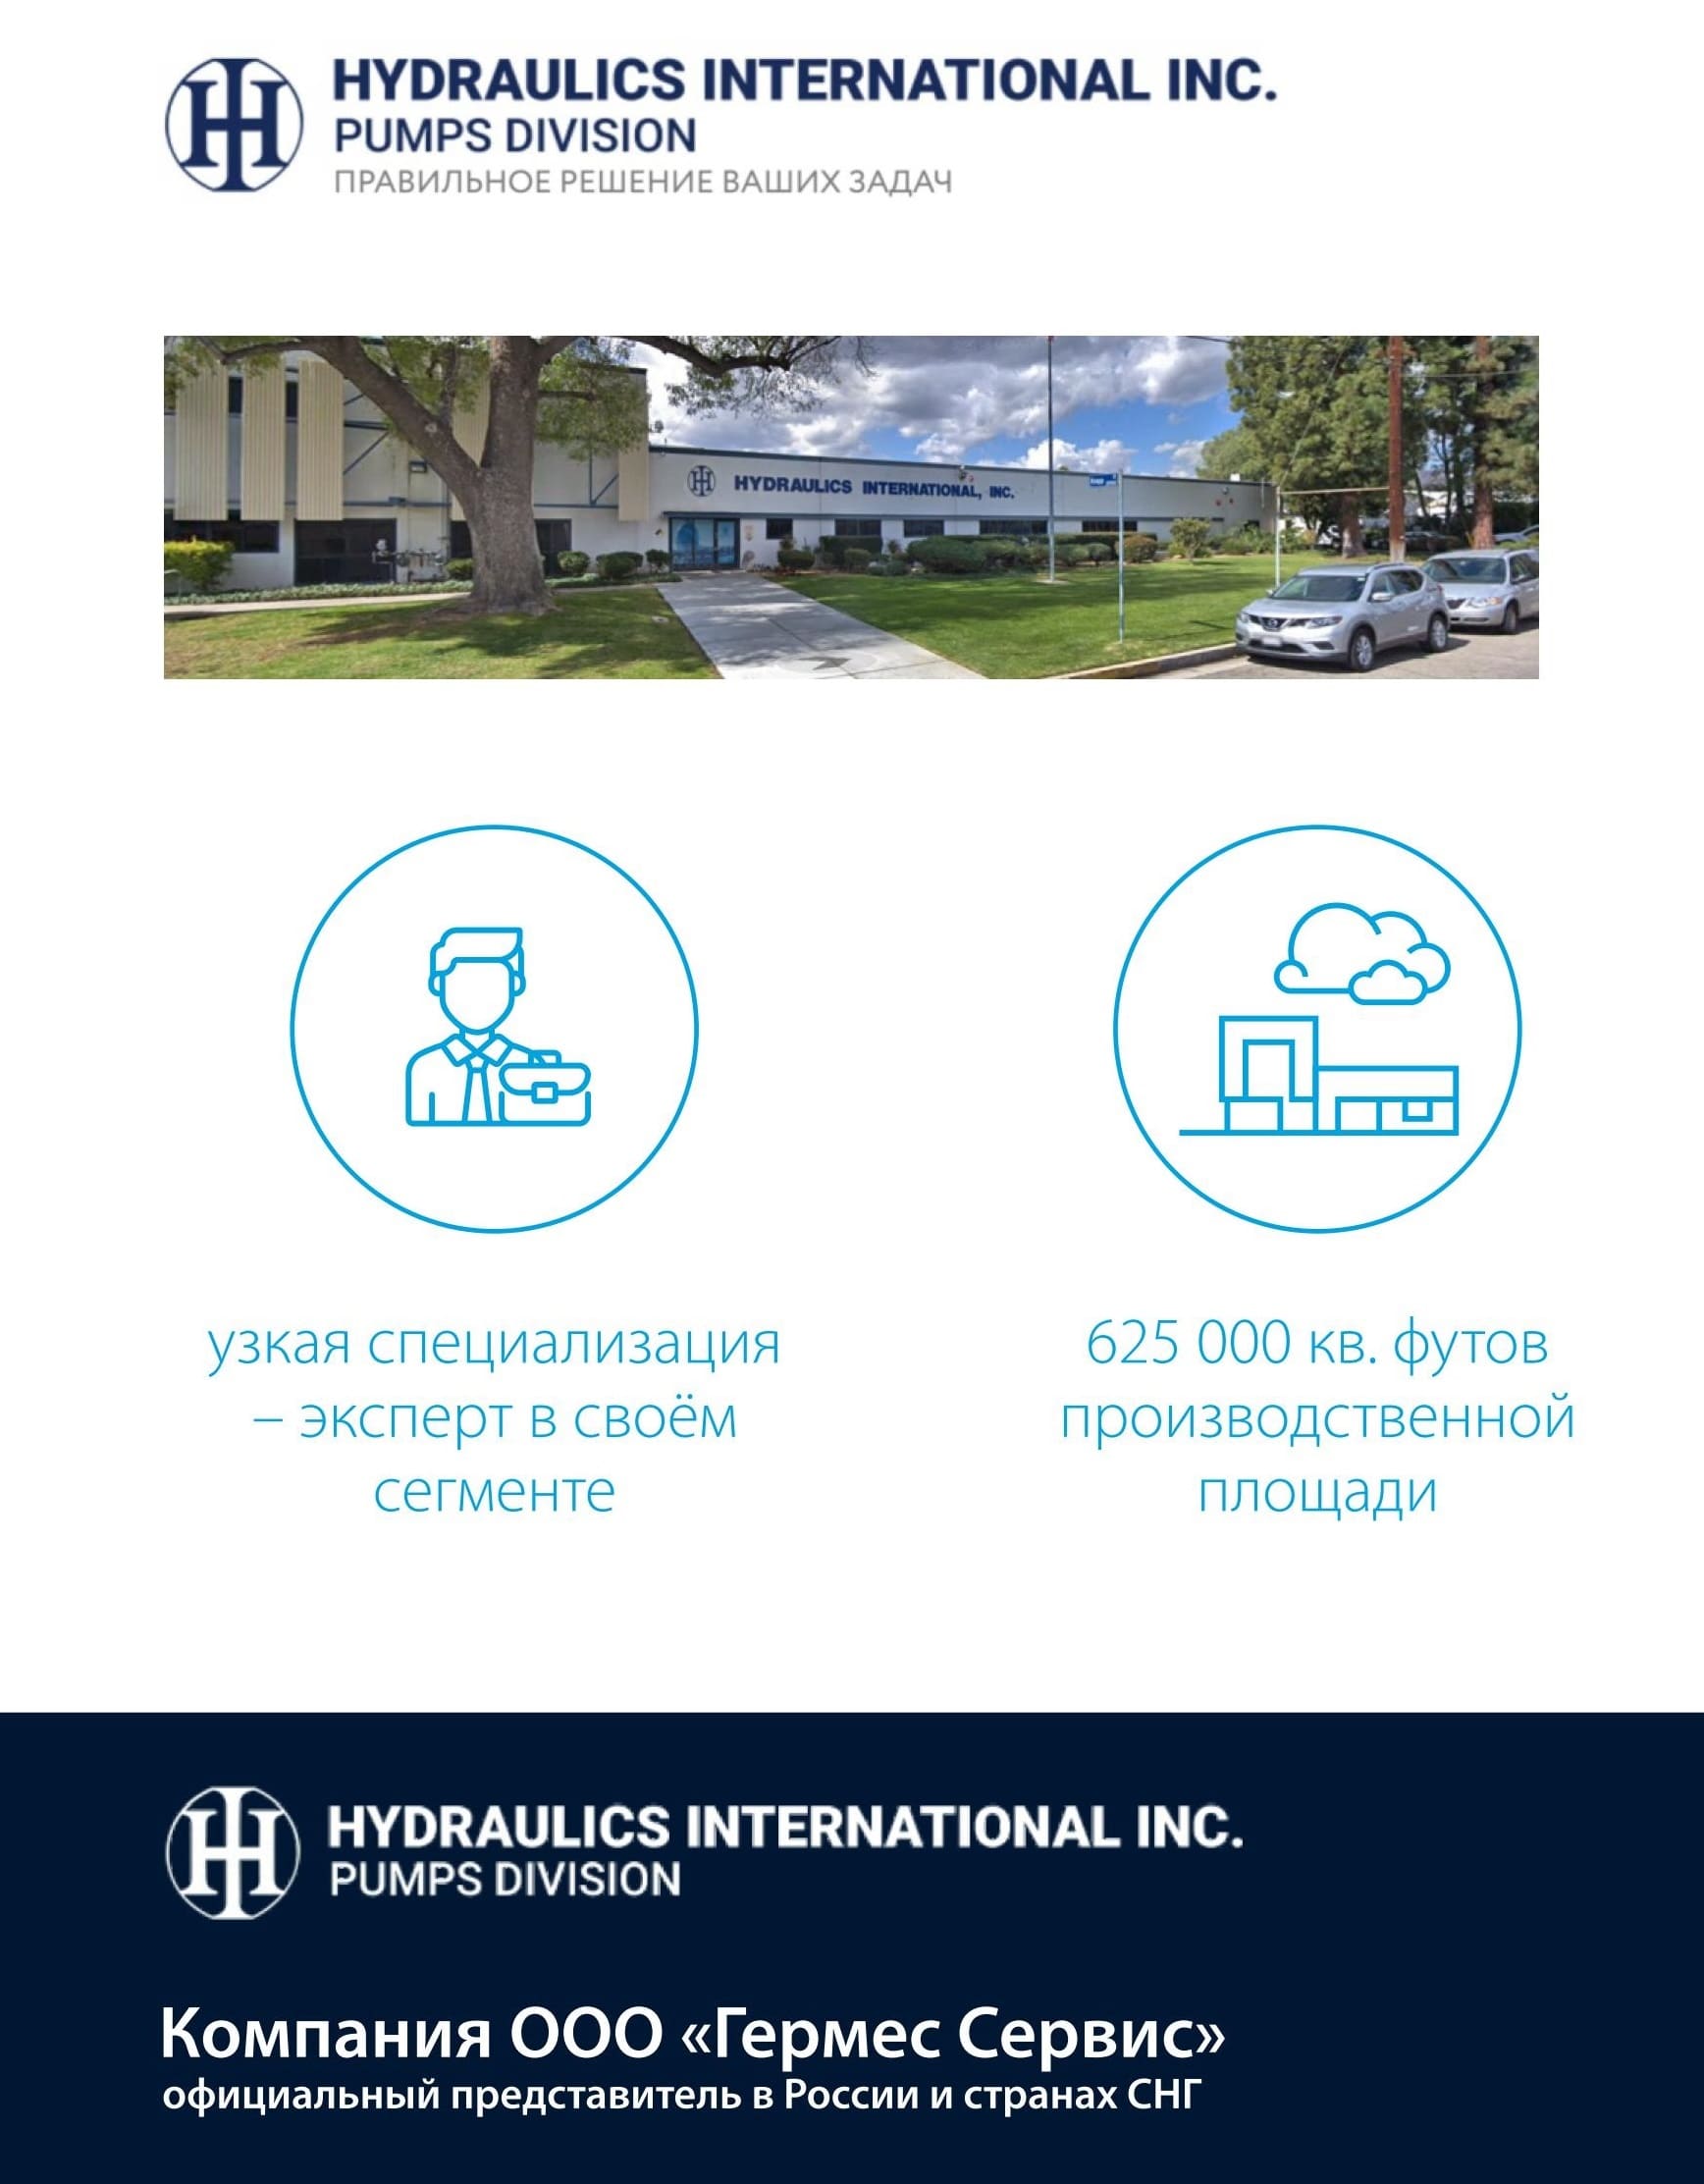 Brief overview of Hydraulics International products-brochure in Russian